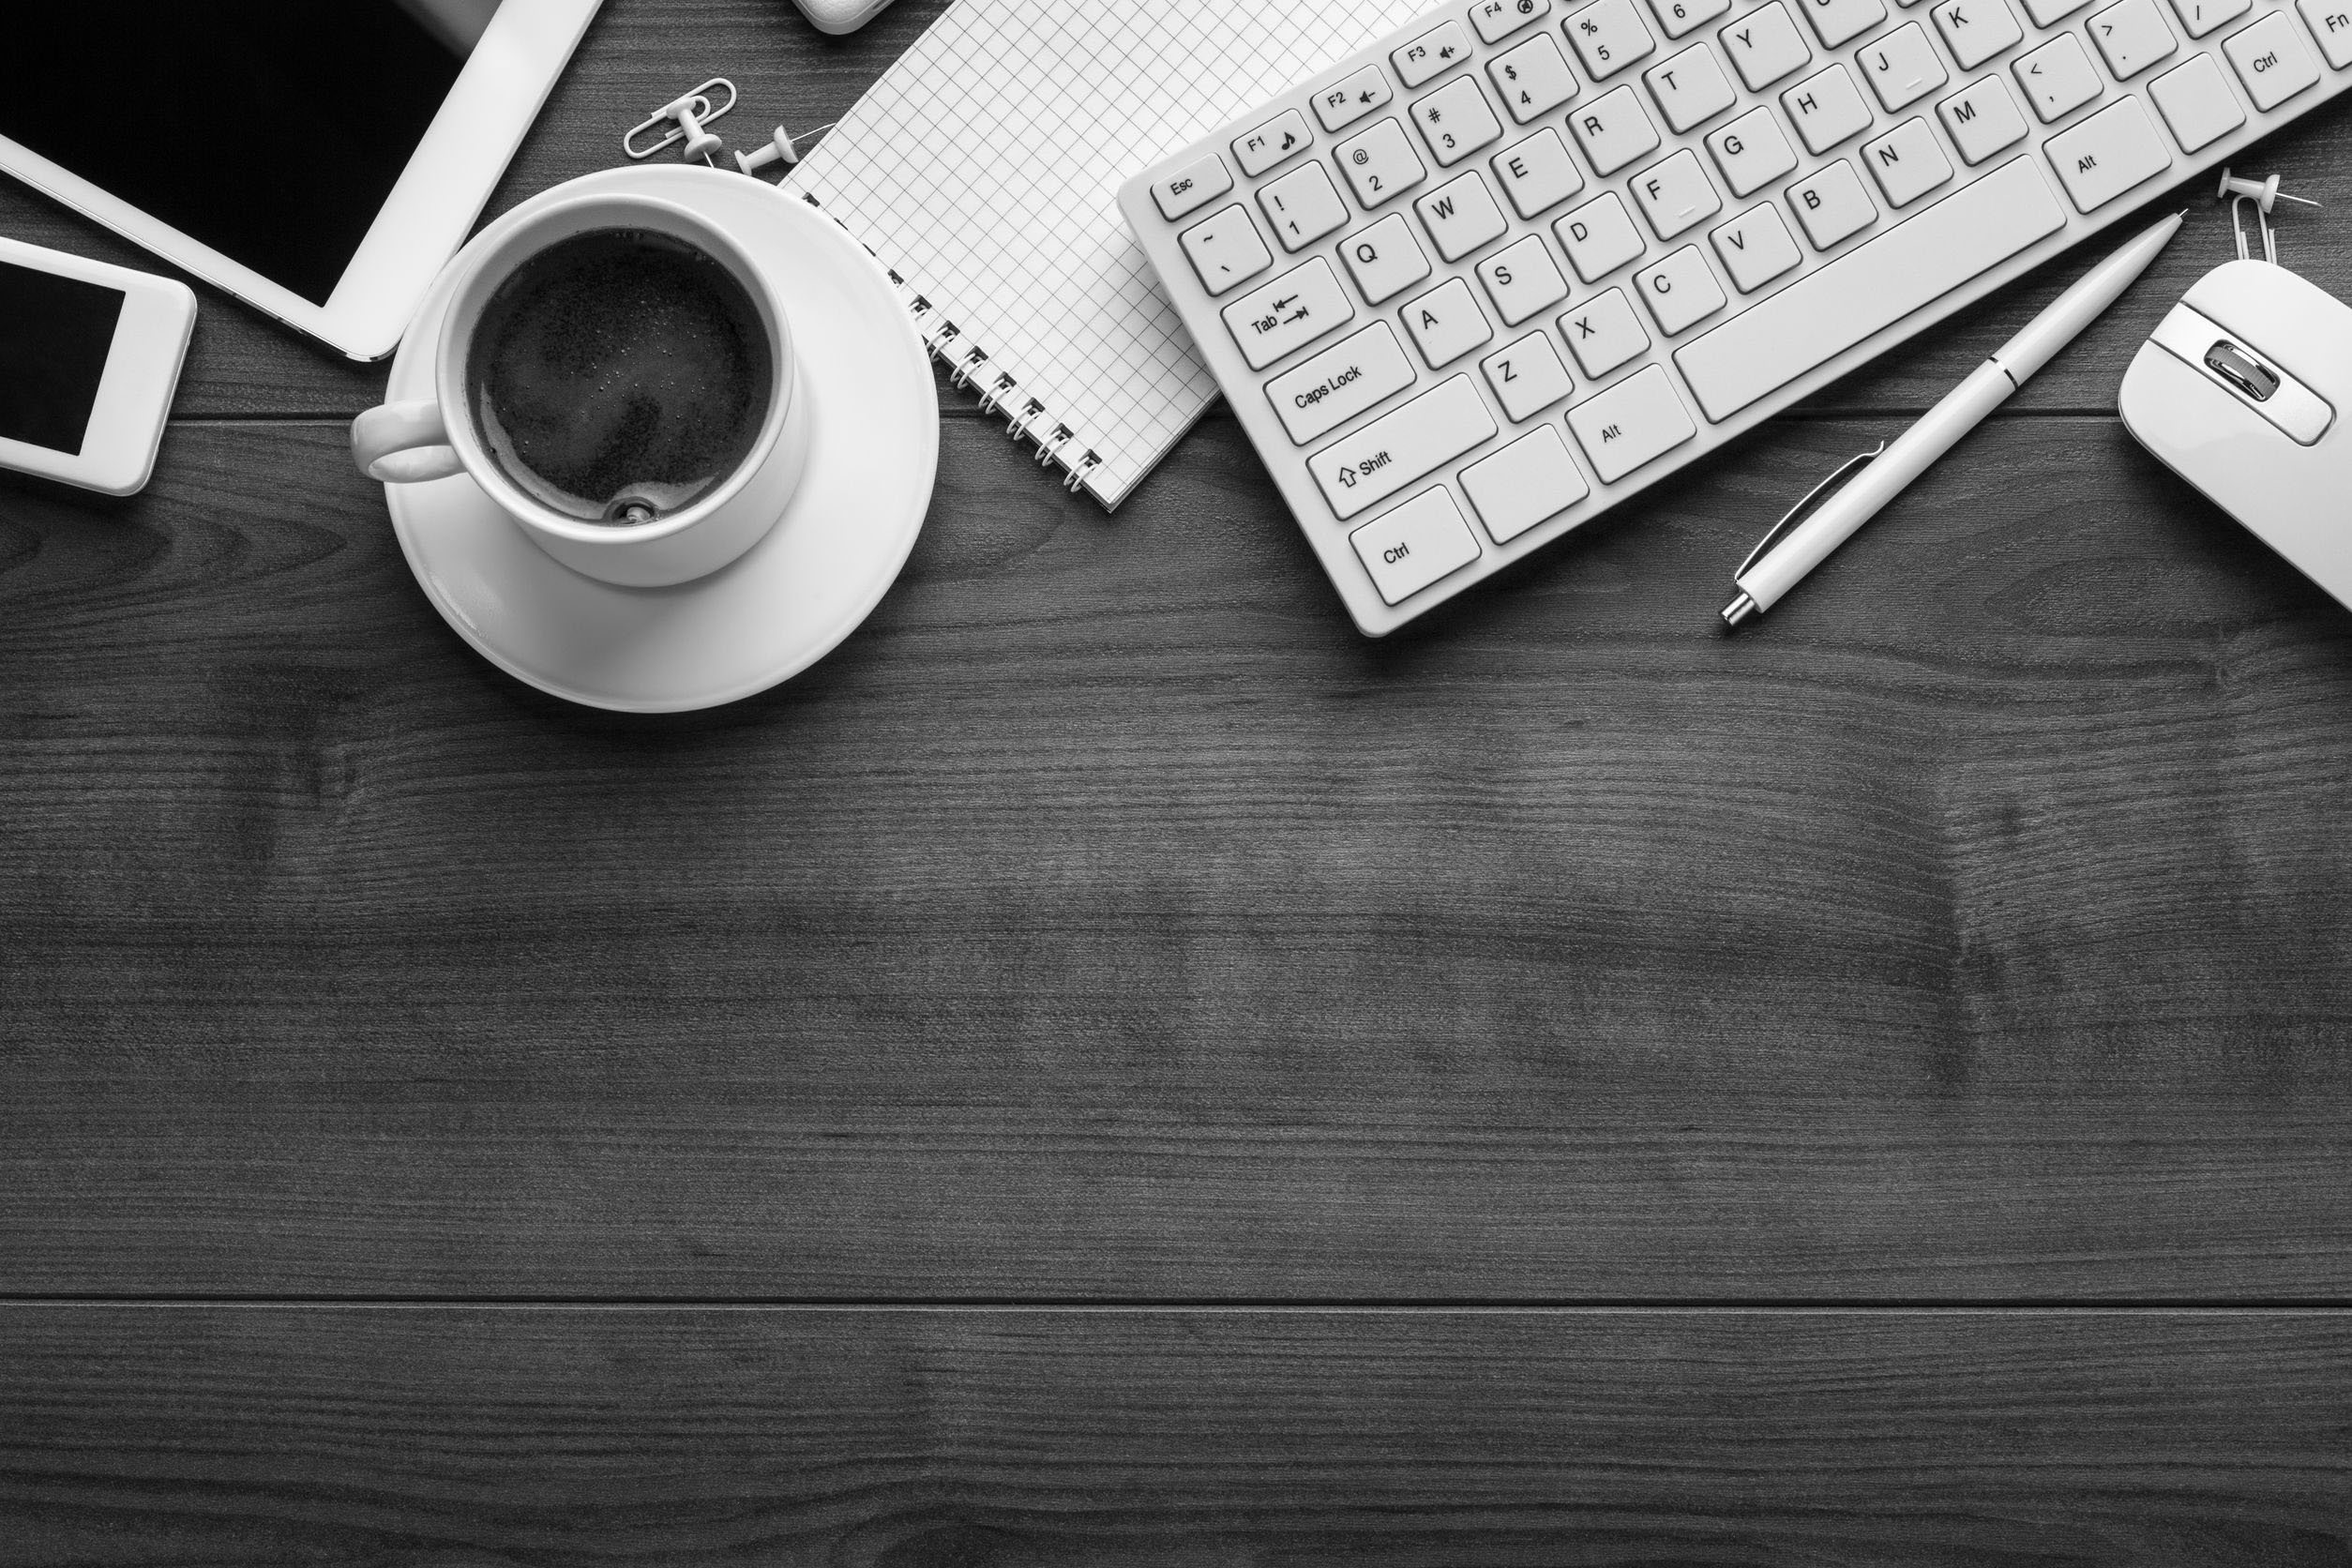 Grayscale photos of a wooden desk with coffee mug, notepad, tablet, and cellphone